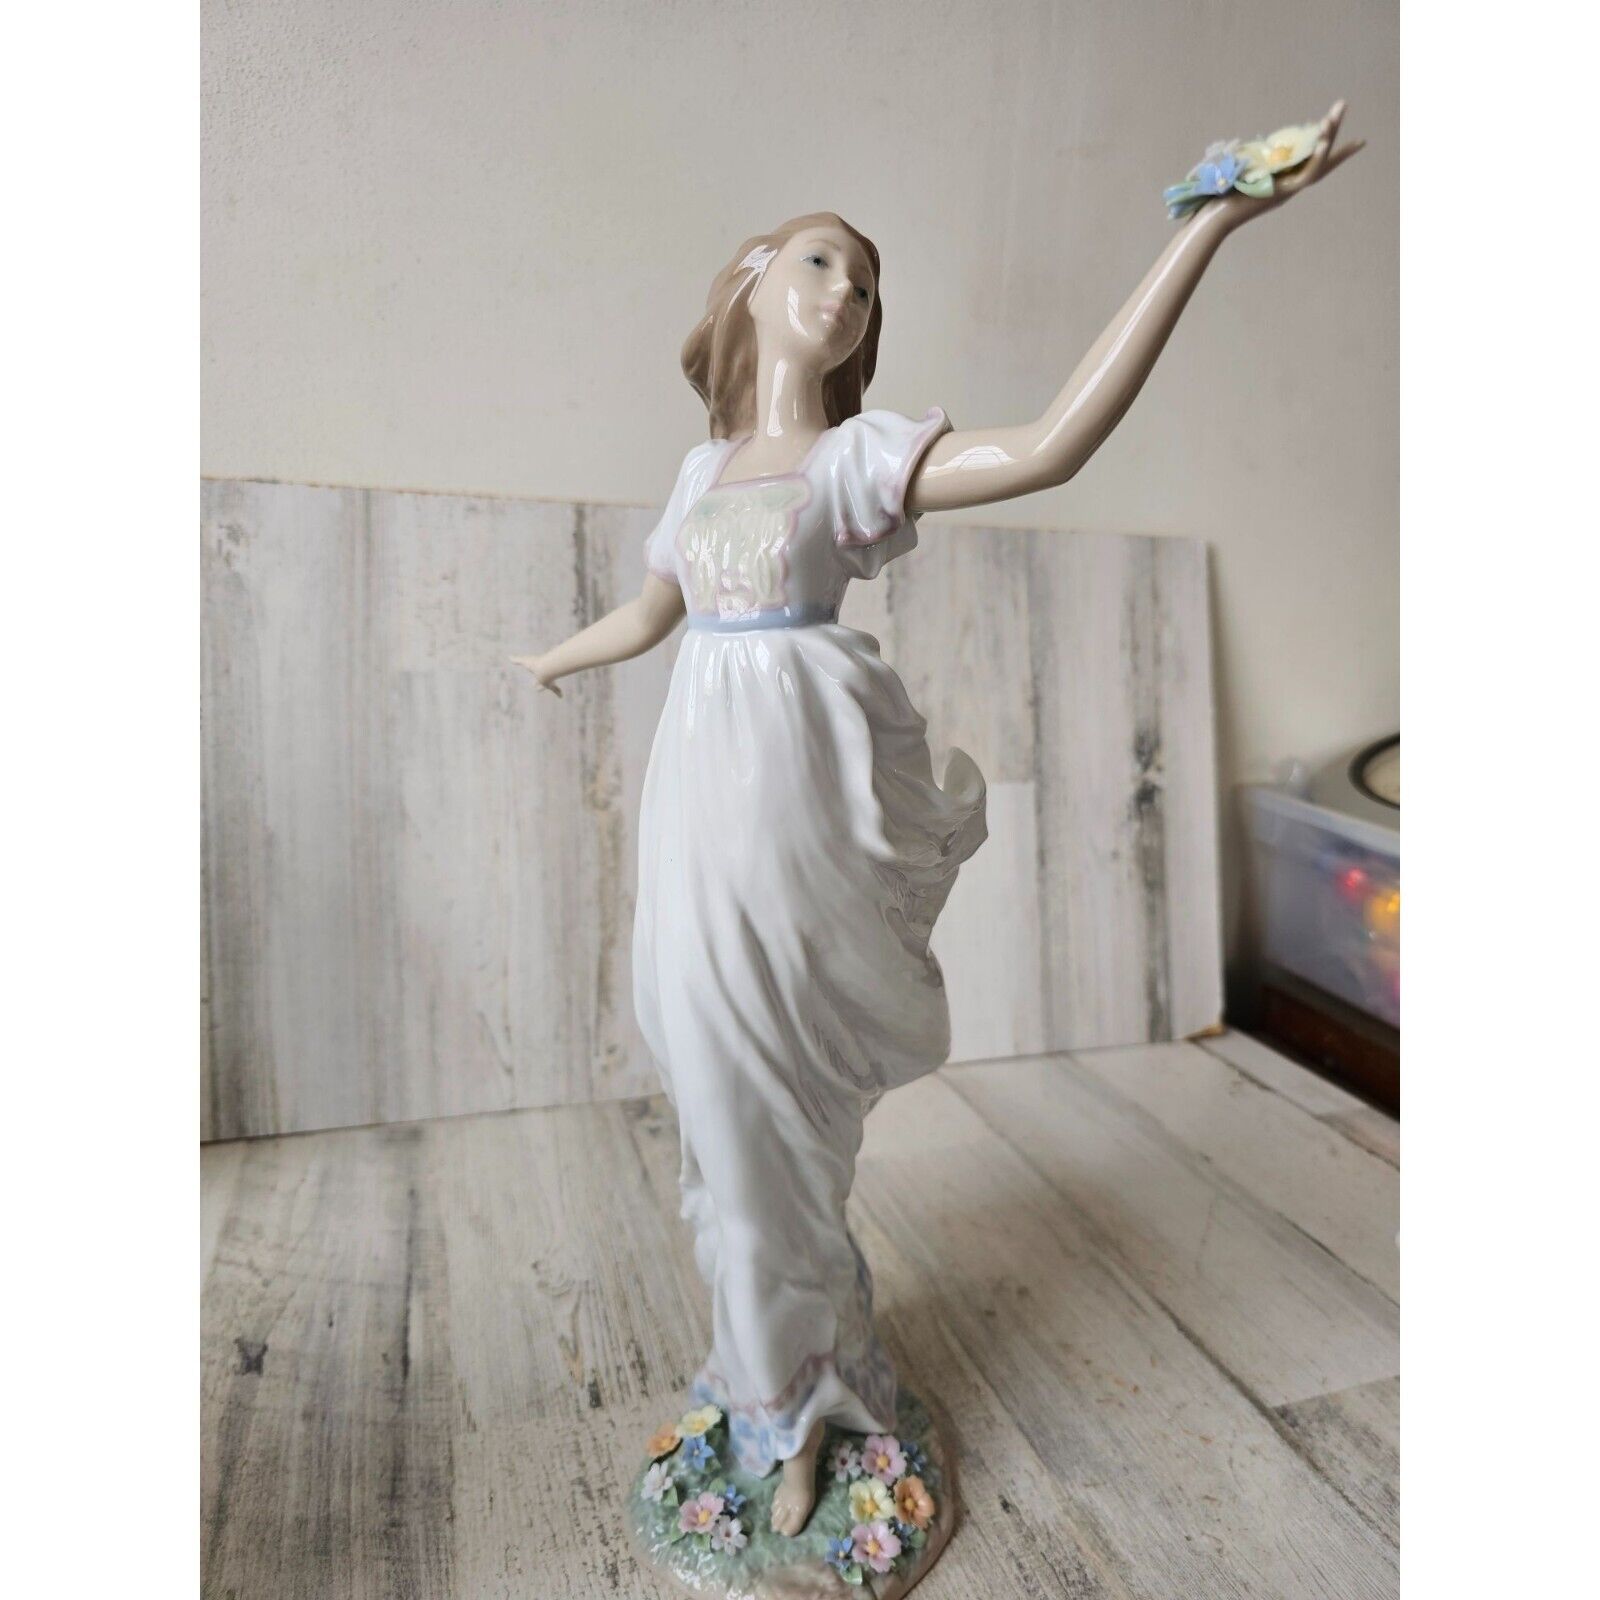 Lladro 6649 allegory of youth girl flowers dancing jumping figurine statue